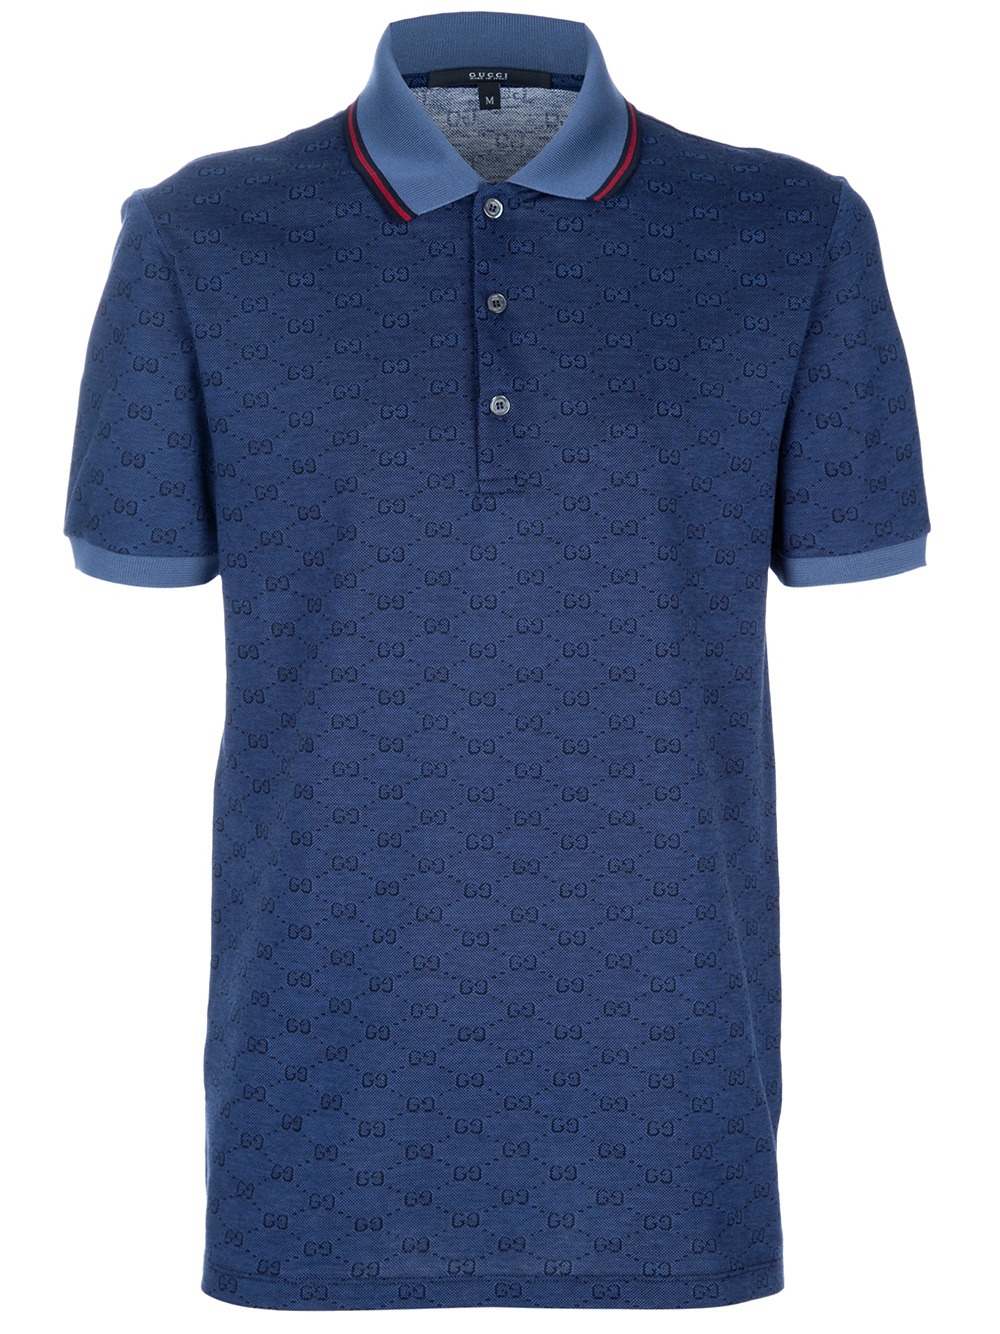 Gucci Monogrammed Polo Shirt in Blue for Men - Lyst